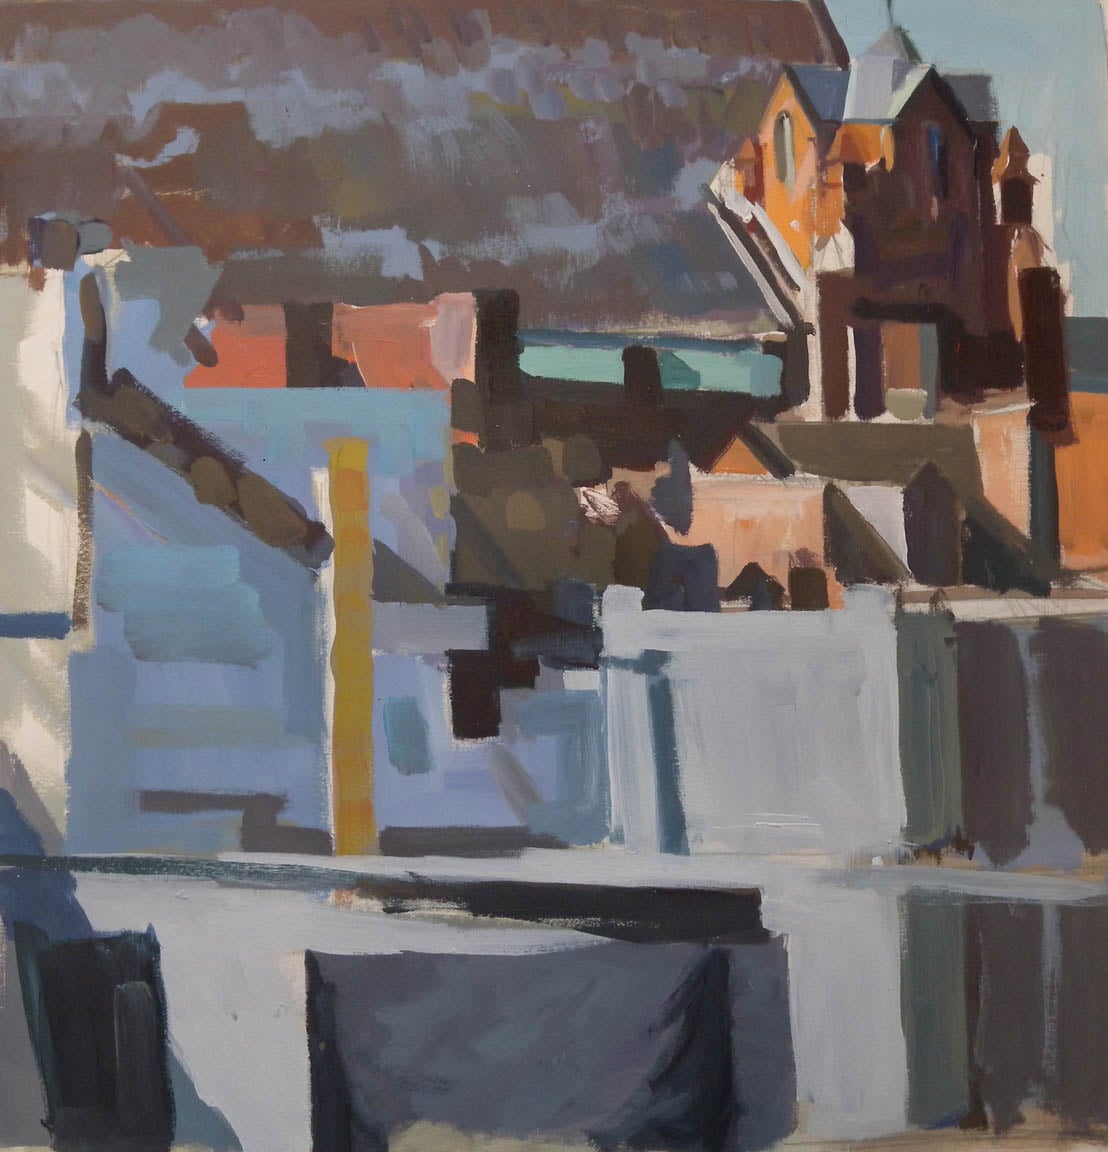  City Rooftops (unfinished),&nbsp;acrylic on paper, 18 1/2" x 18" 